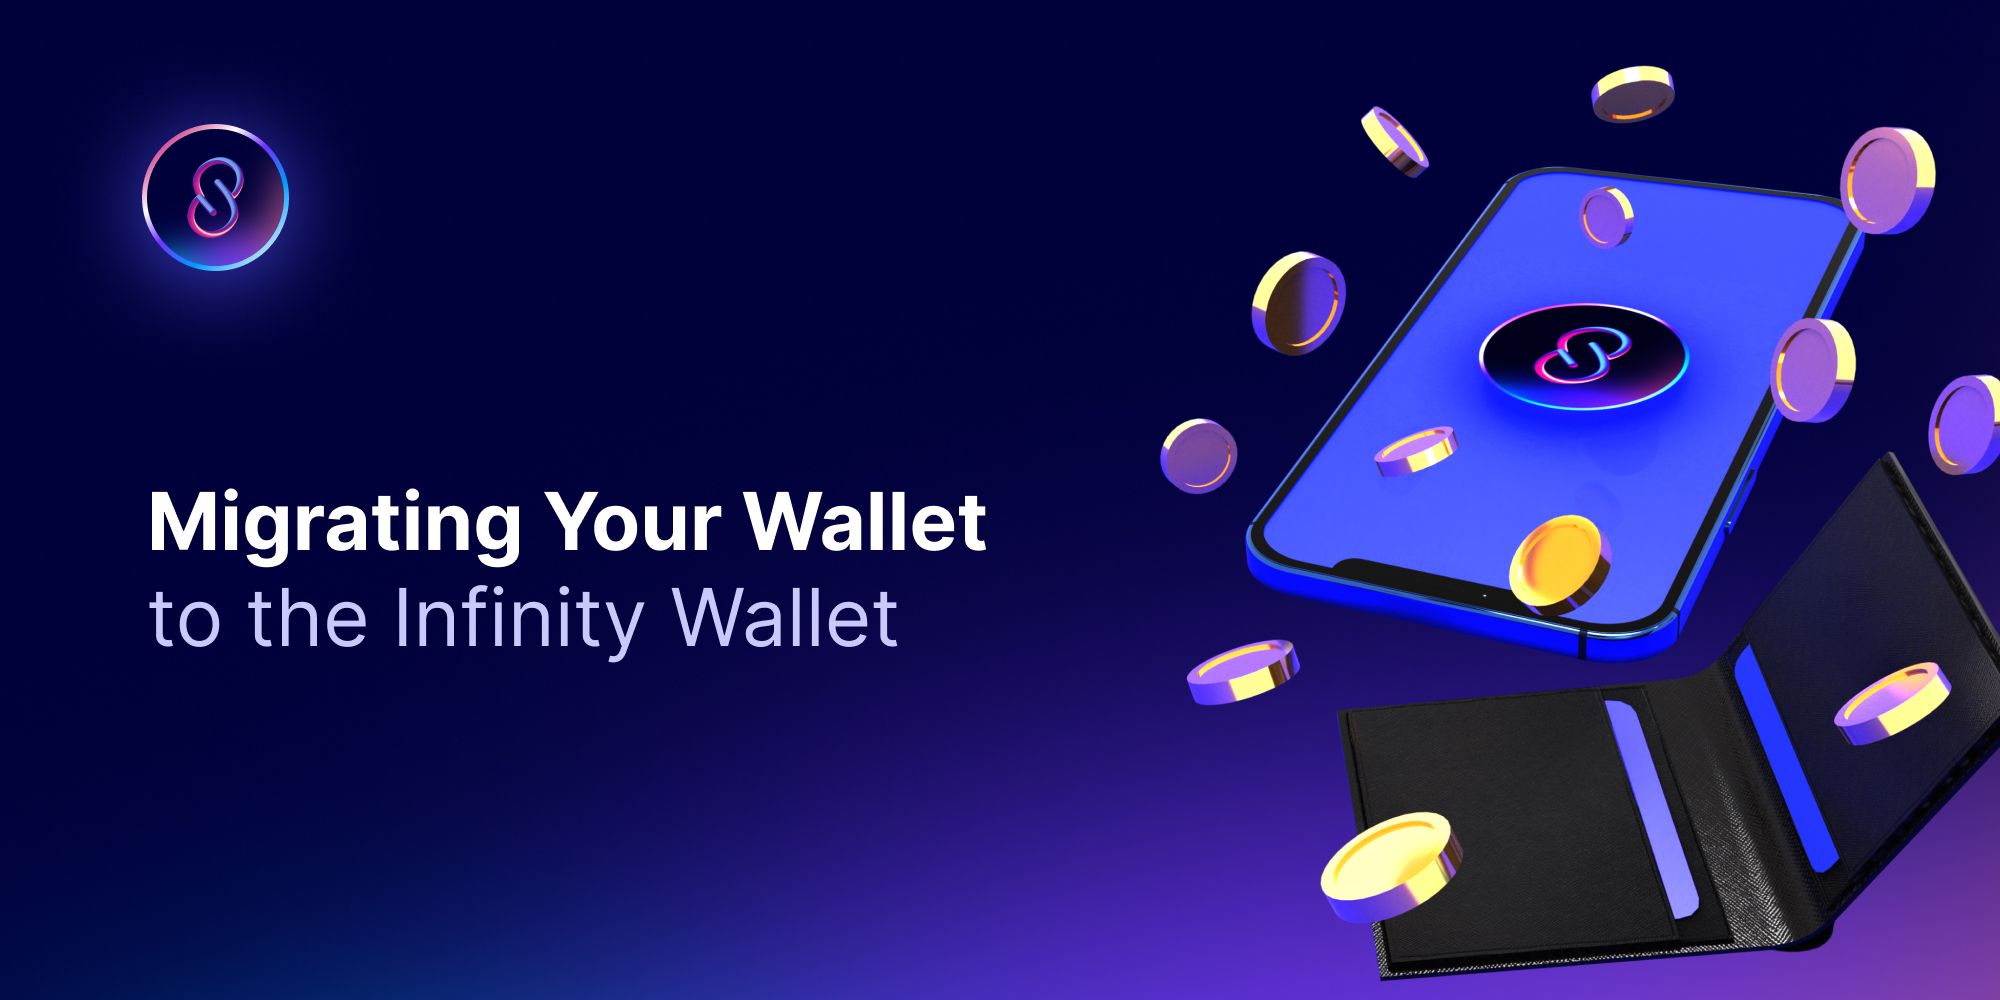 Migrating Your Wallet to the Infinity Wallet